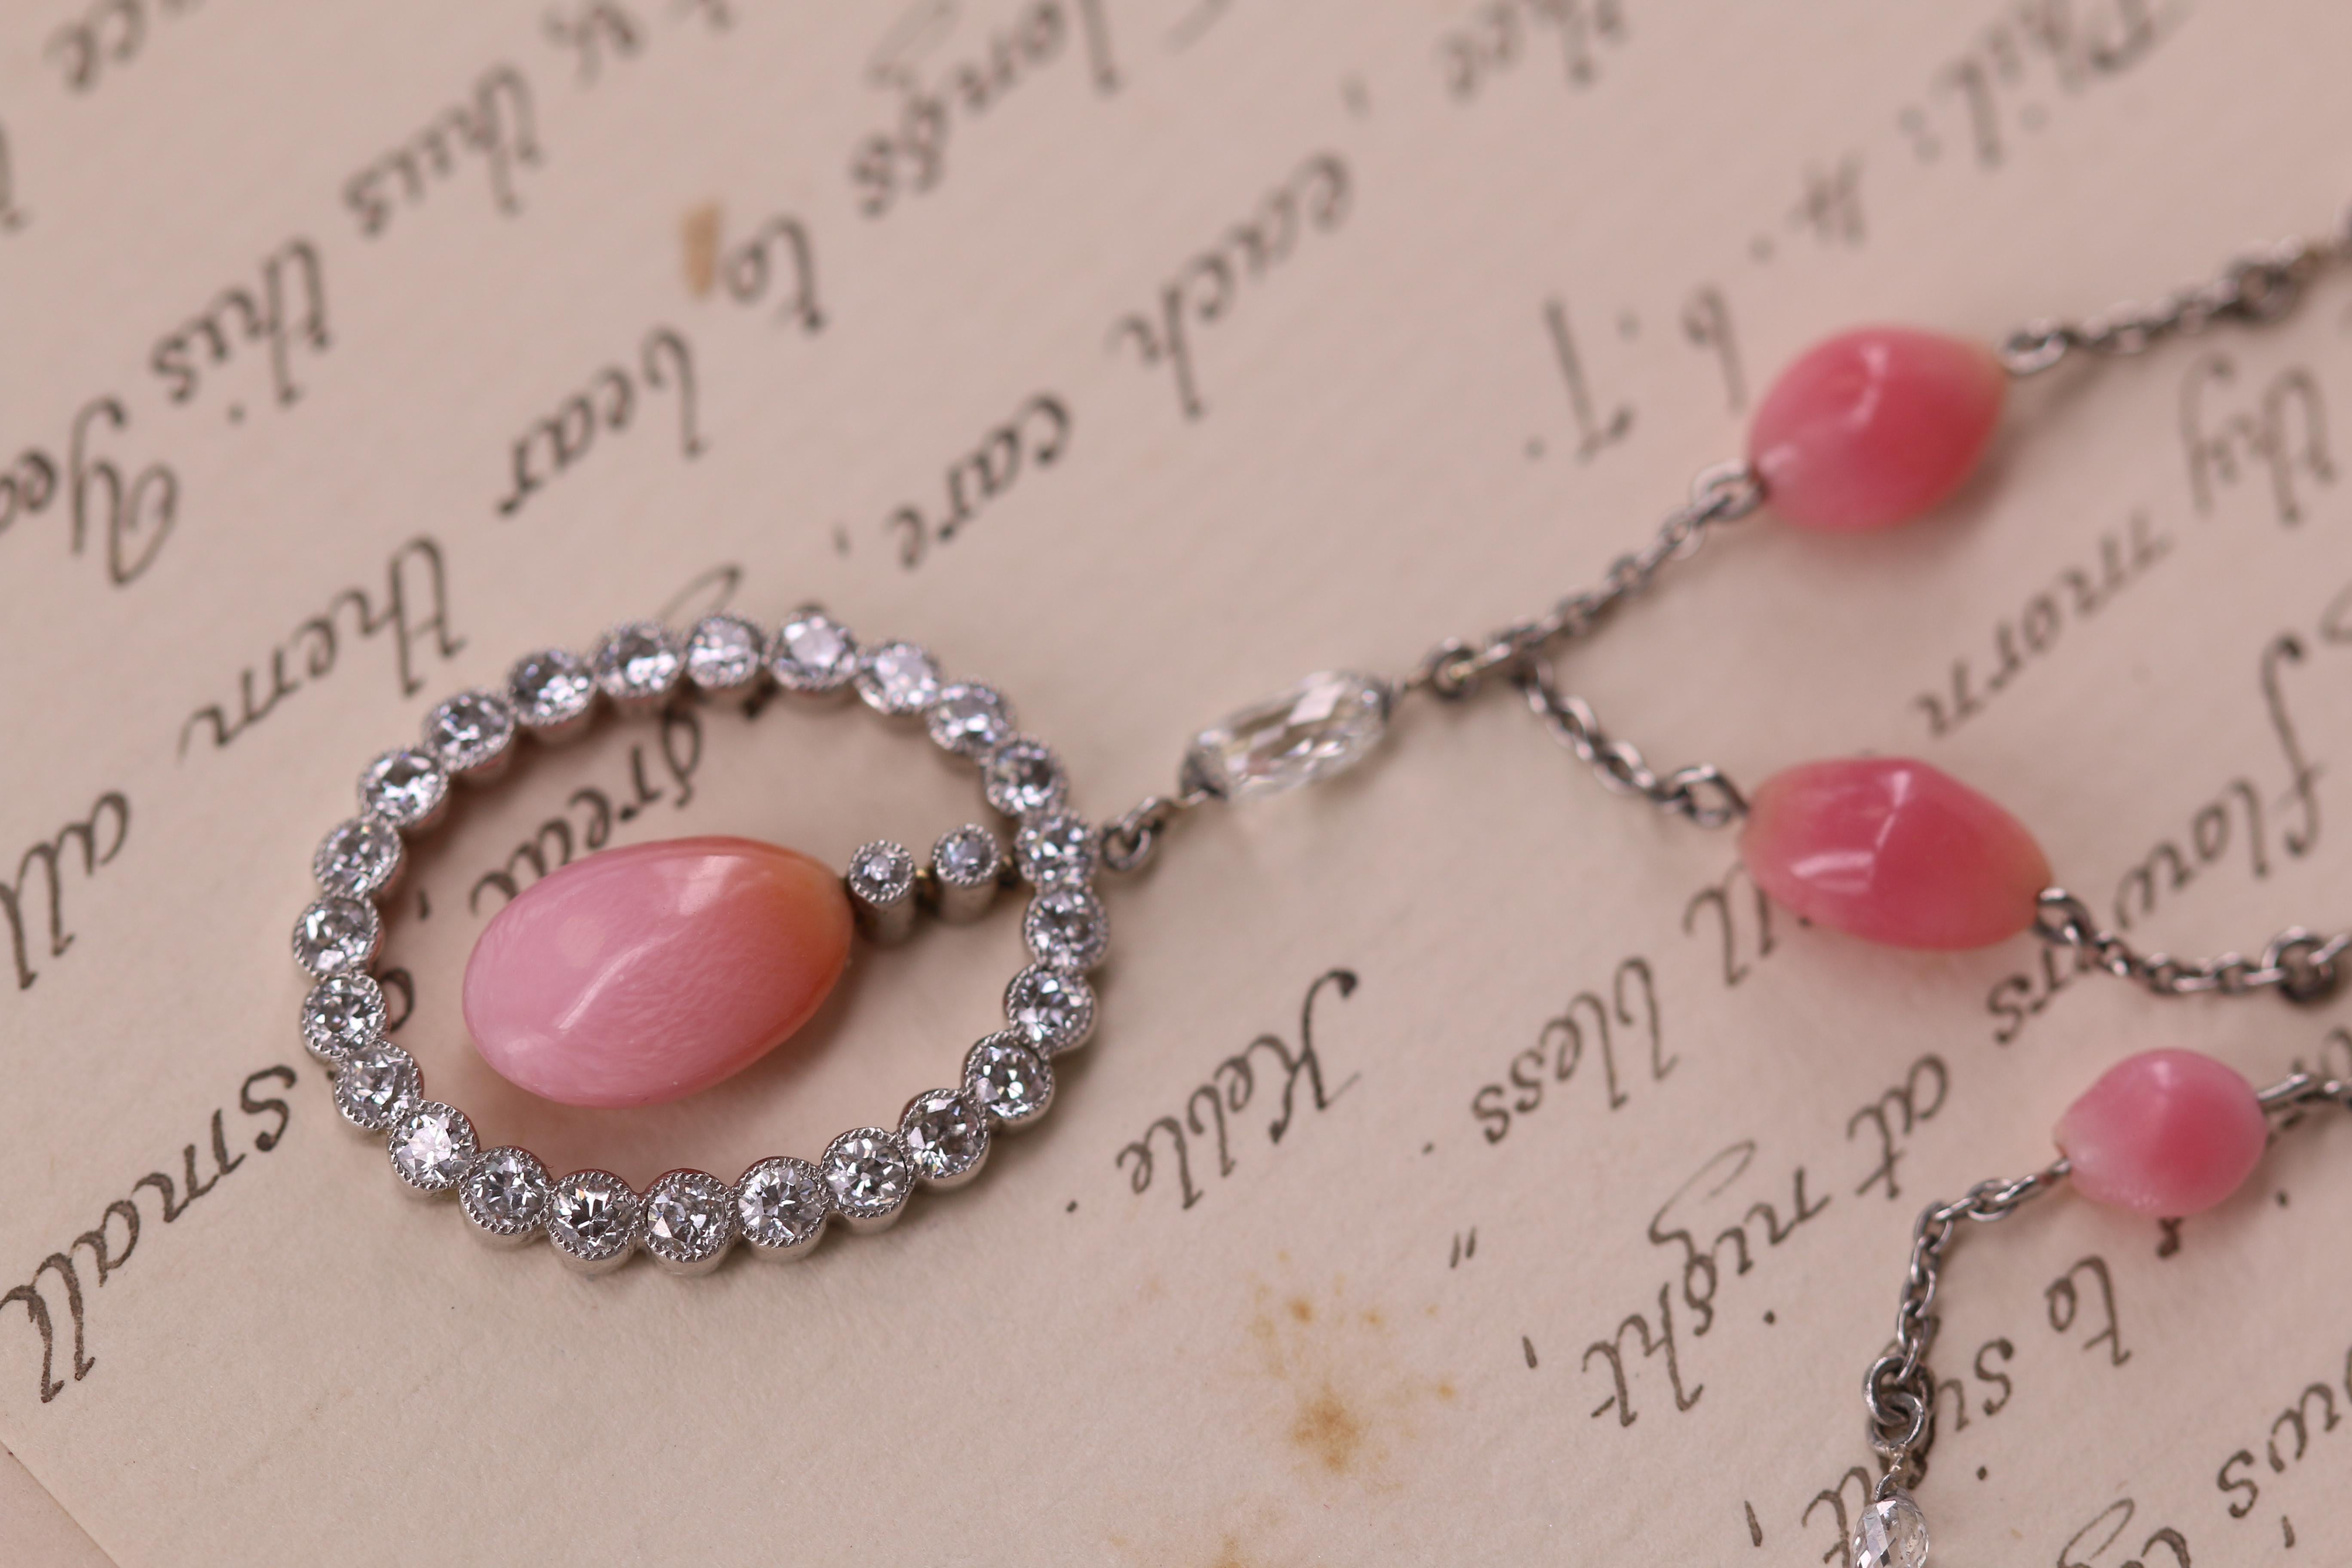 main pearl approx. 11.00 x 7.25 x 4.75 mm
weight:  9.9g;
Length. 18 1/2 in. 

This is a special pendant necklace. The conch pearls decorating the chain are a wonderful deep pink and are well matched. The bigger drop pearl in the pendant is a softer